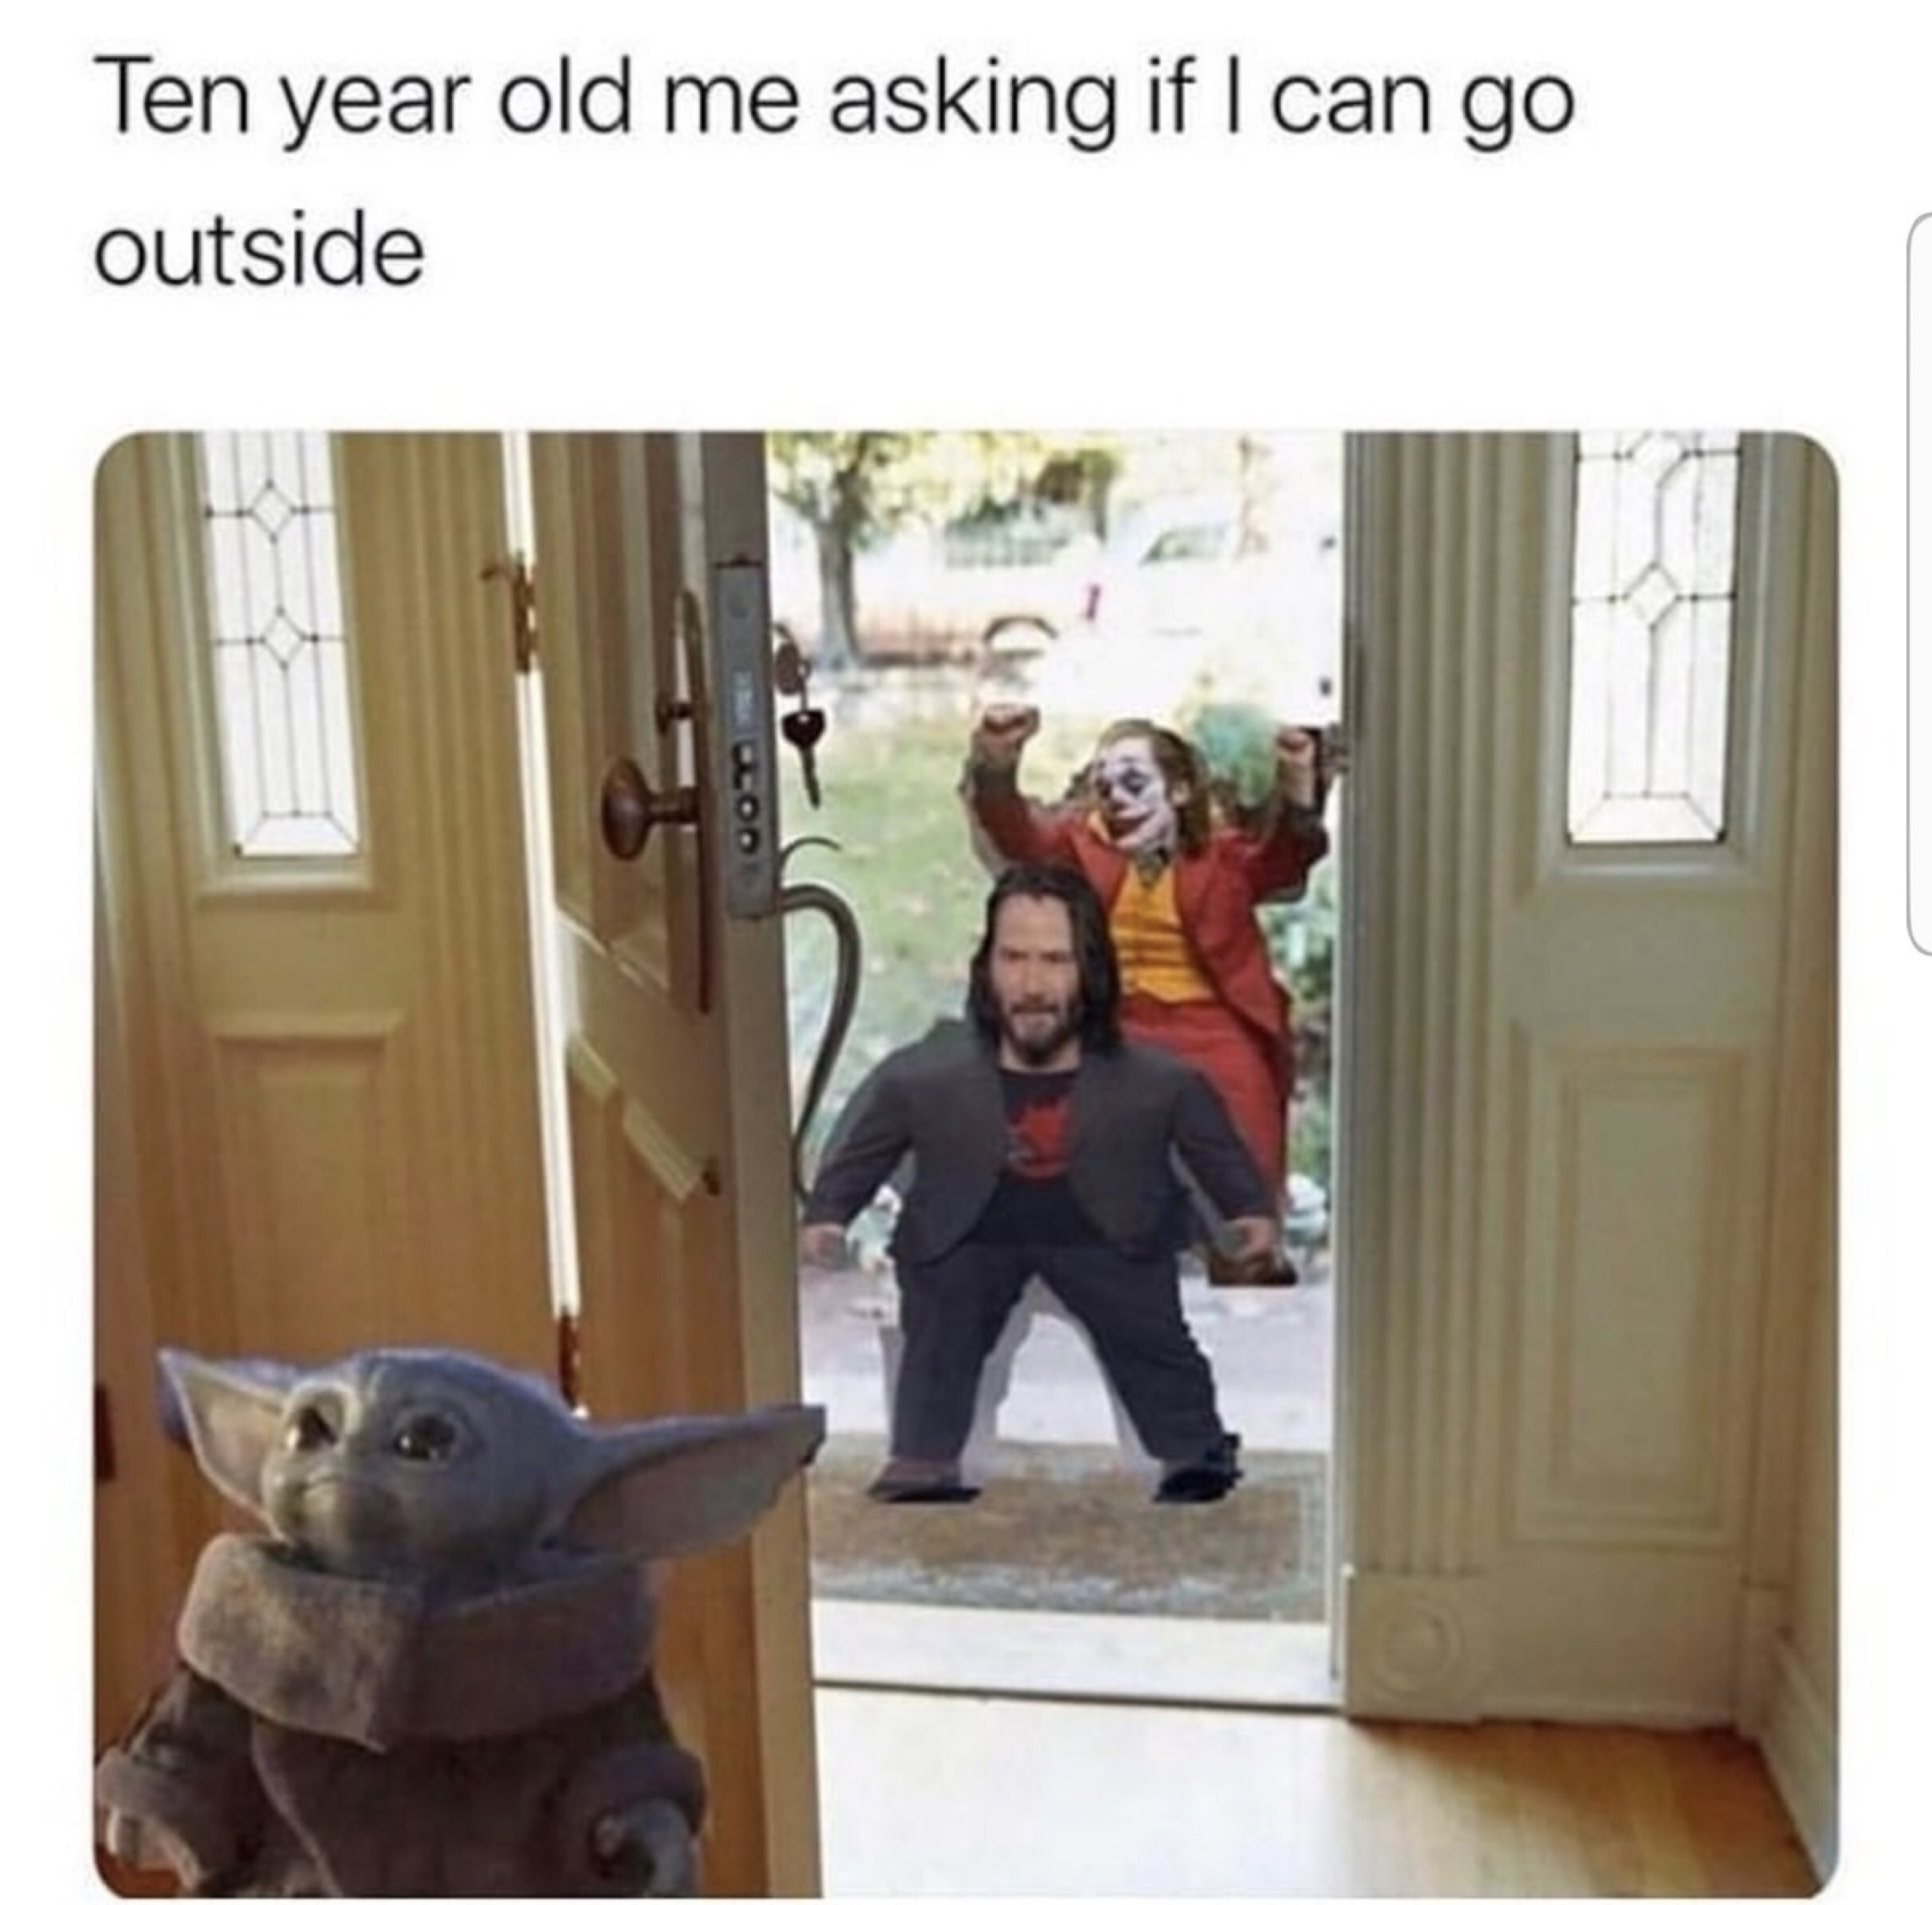 baby yoda meme 10 year old me - Ten year old me asking if I can go outside